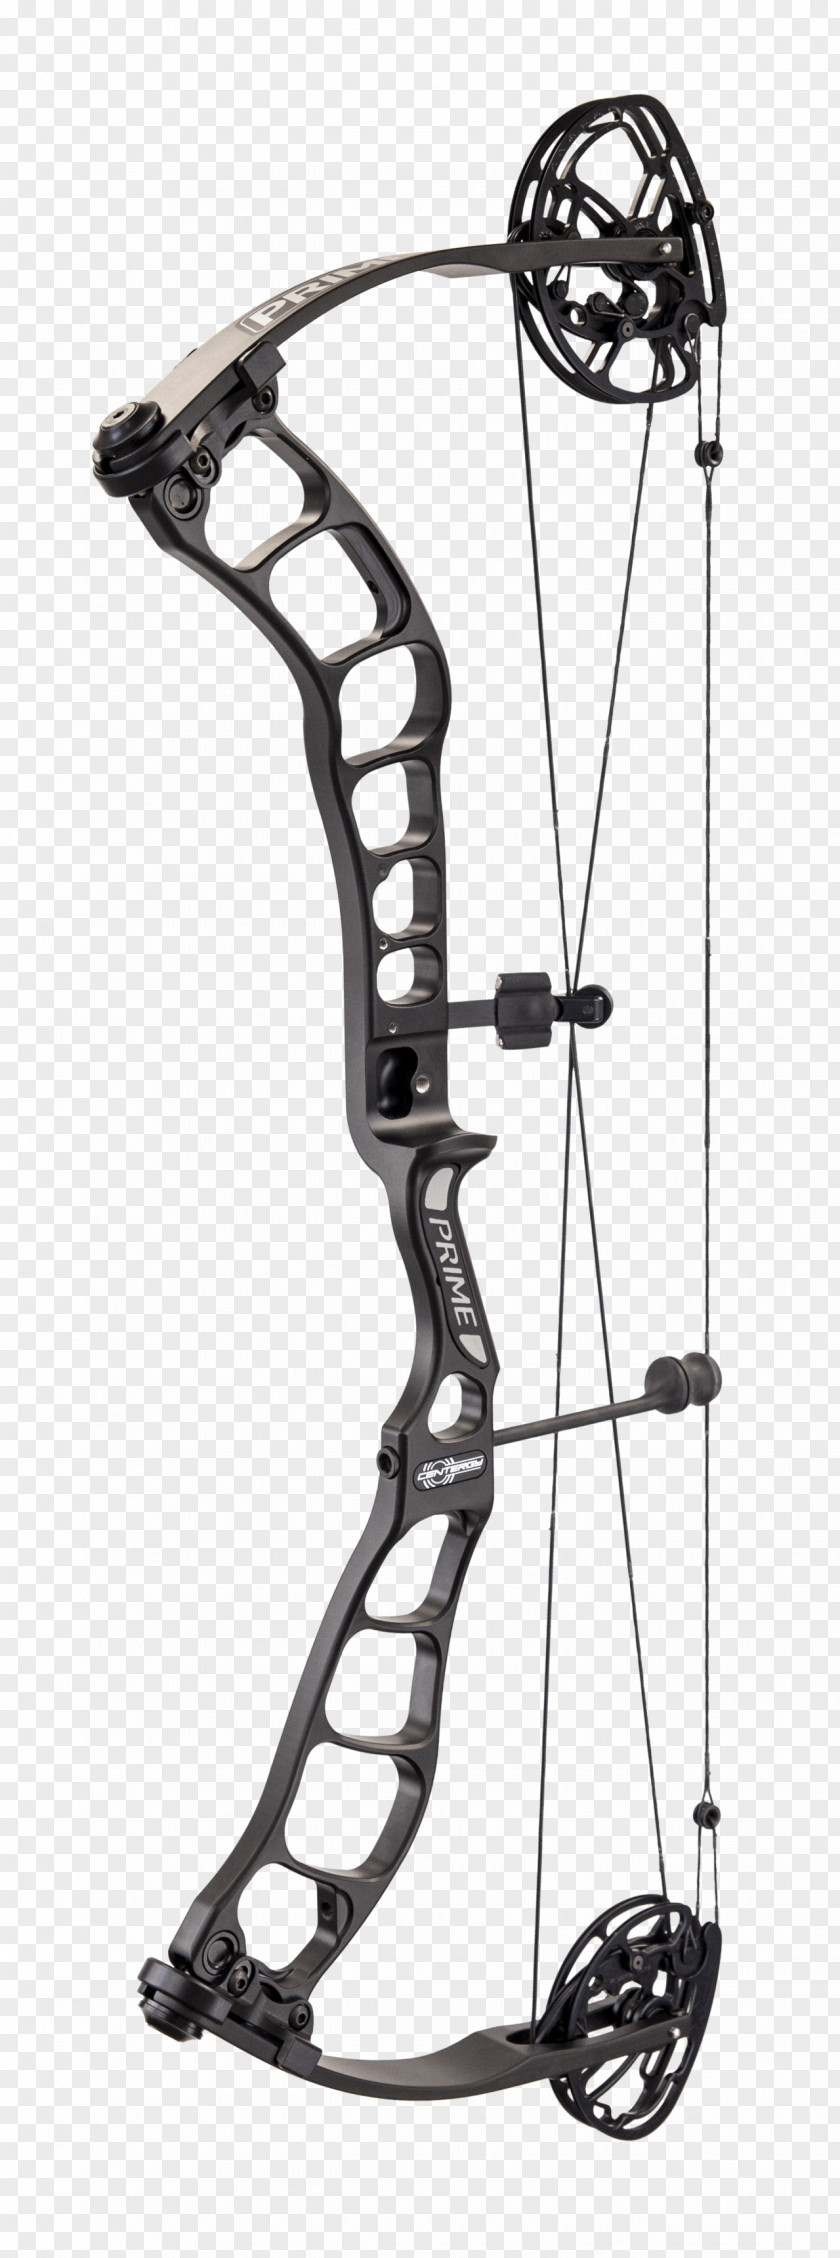 Archery G5 Outdoors Hunting Compound Bows Bow And Arrow PNG